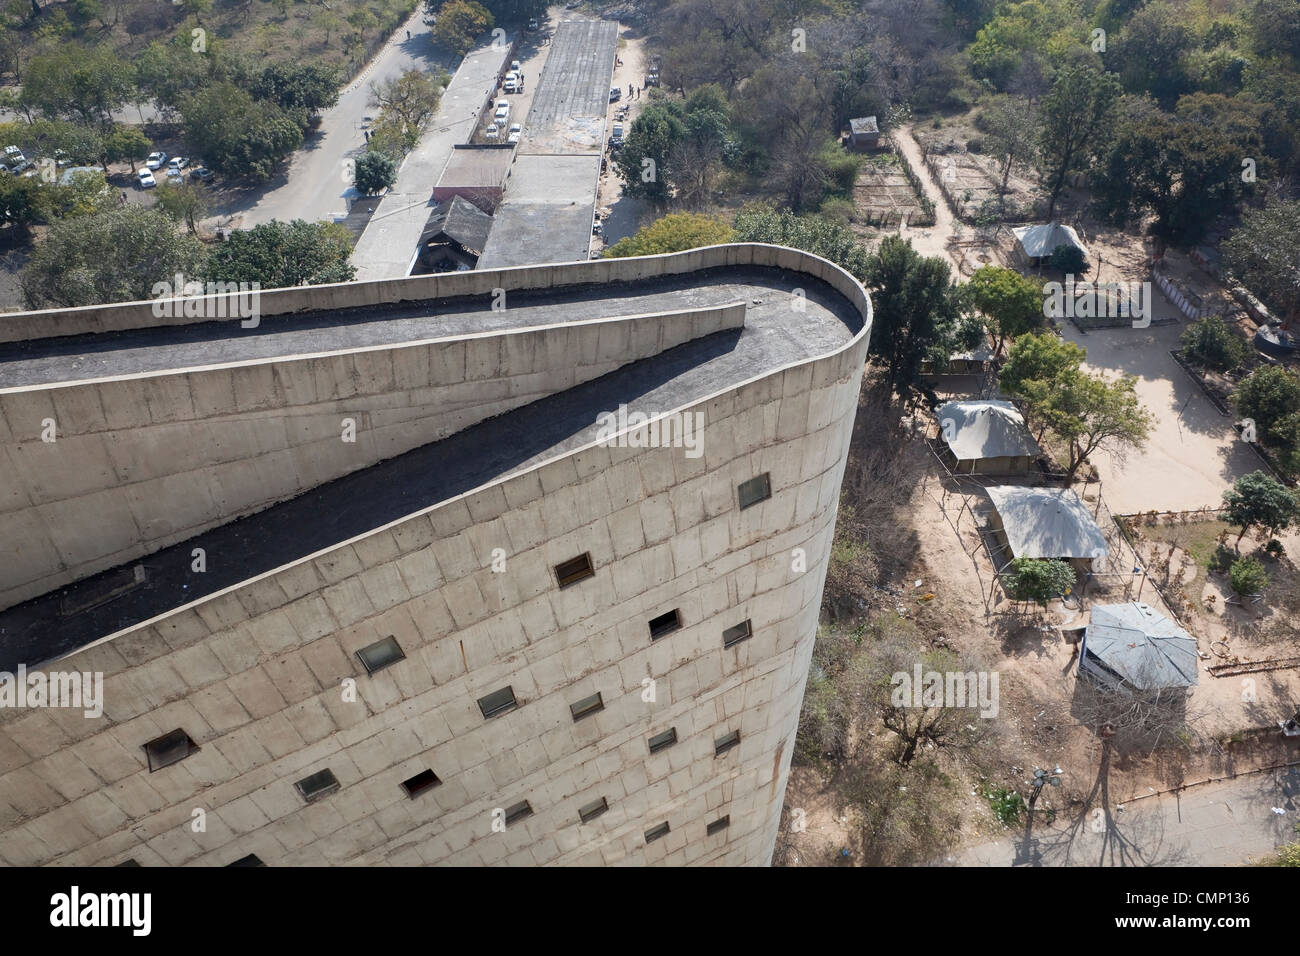 An unusual aerial view from the rooftop of Le Corbusier's famous Secretariat building in the modern city of Chandigarh Stock Photo